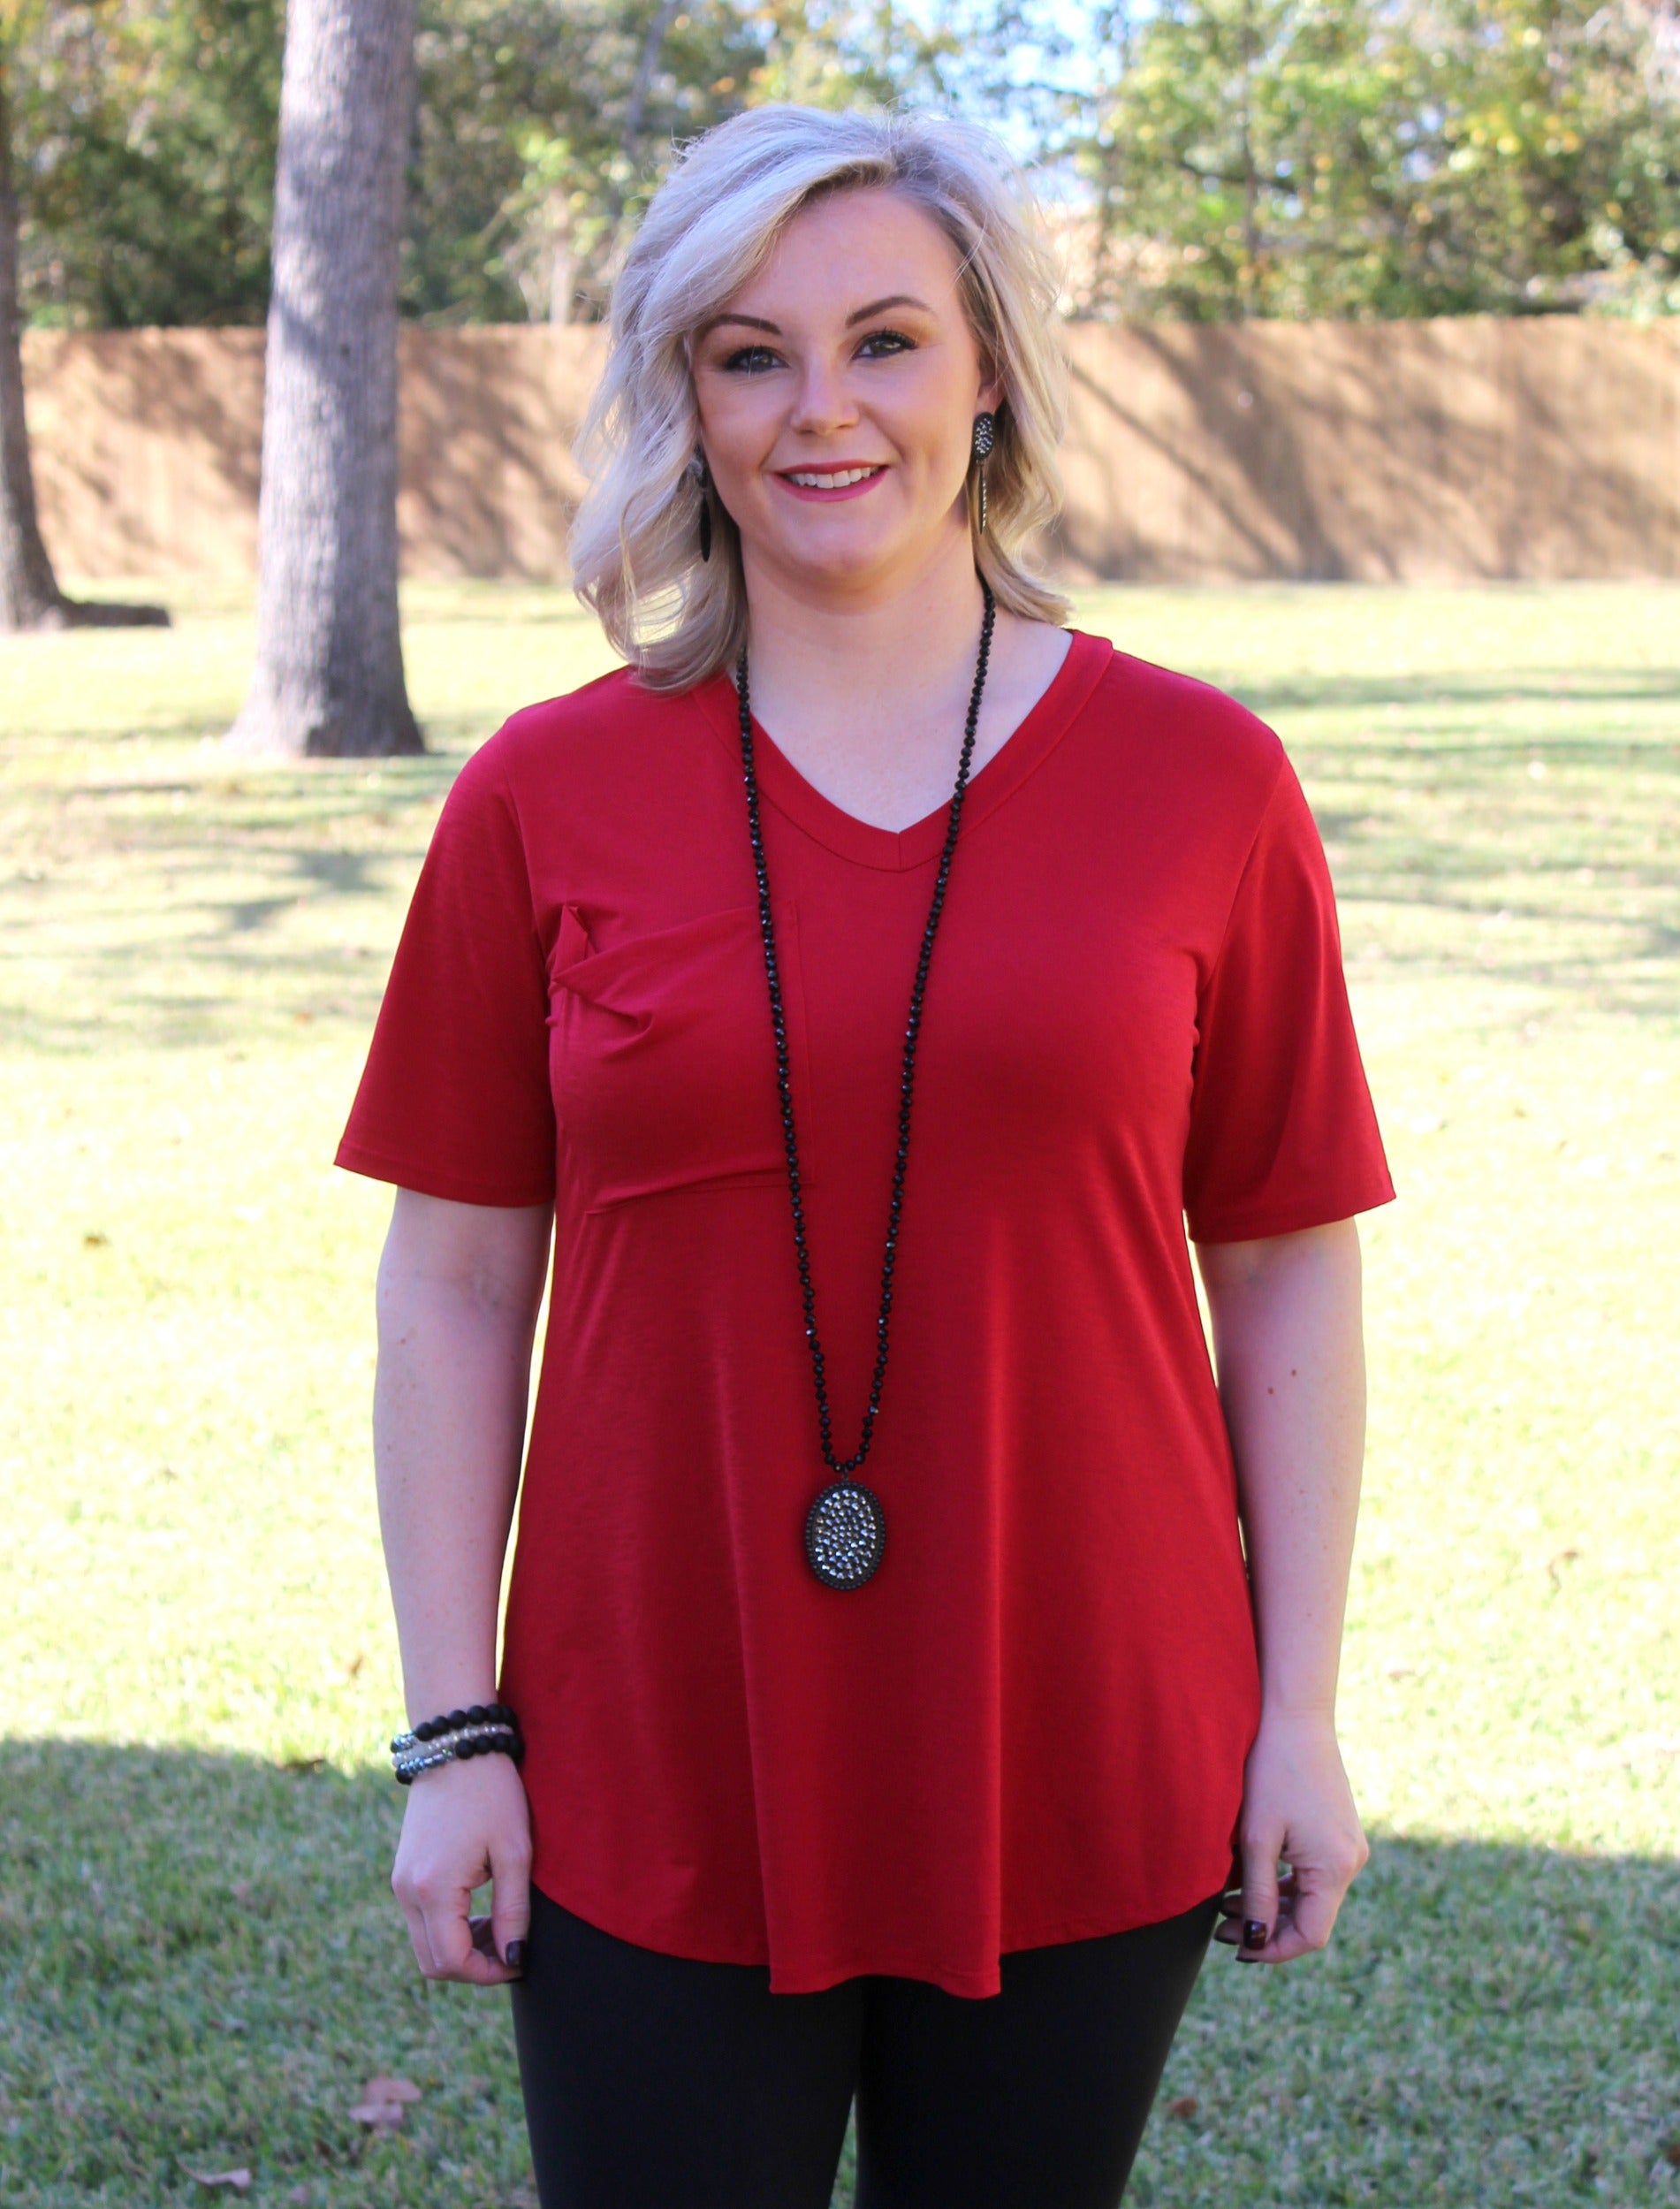 Last Chance Size Small | Just Right Short Sleeve Pocket Tee in Red - Giddy Up Glamour Boutique